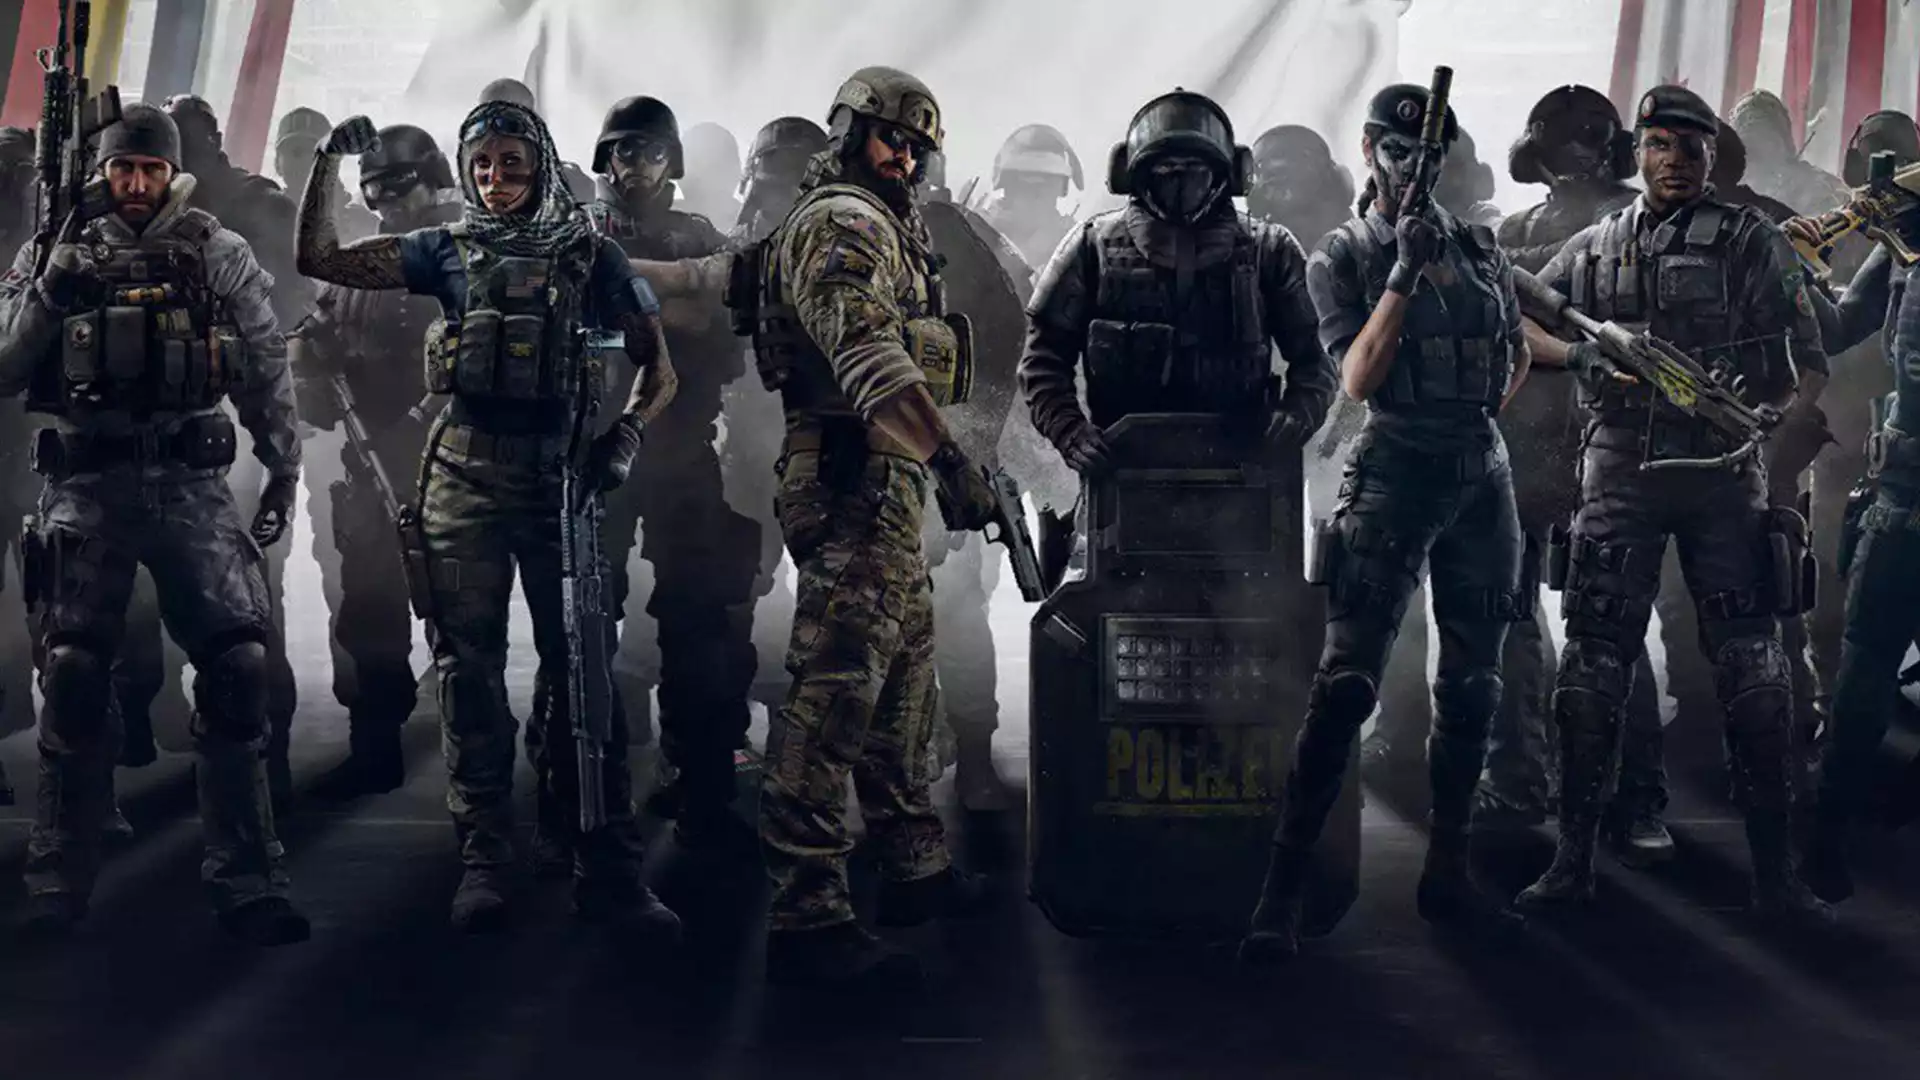 Rainbow Six Siege releases the visual censorship and brings back the old look